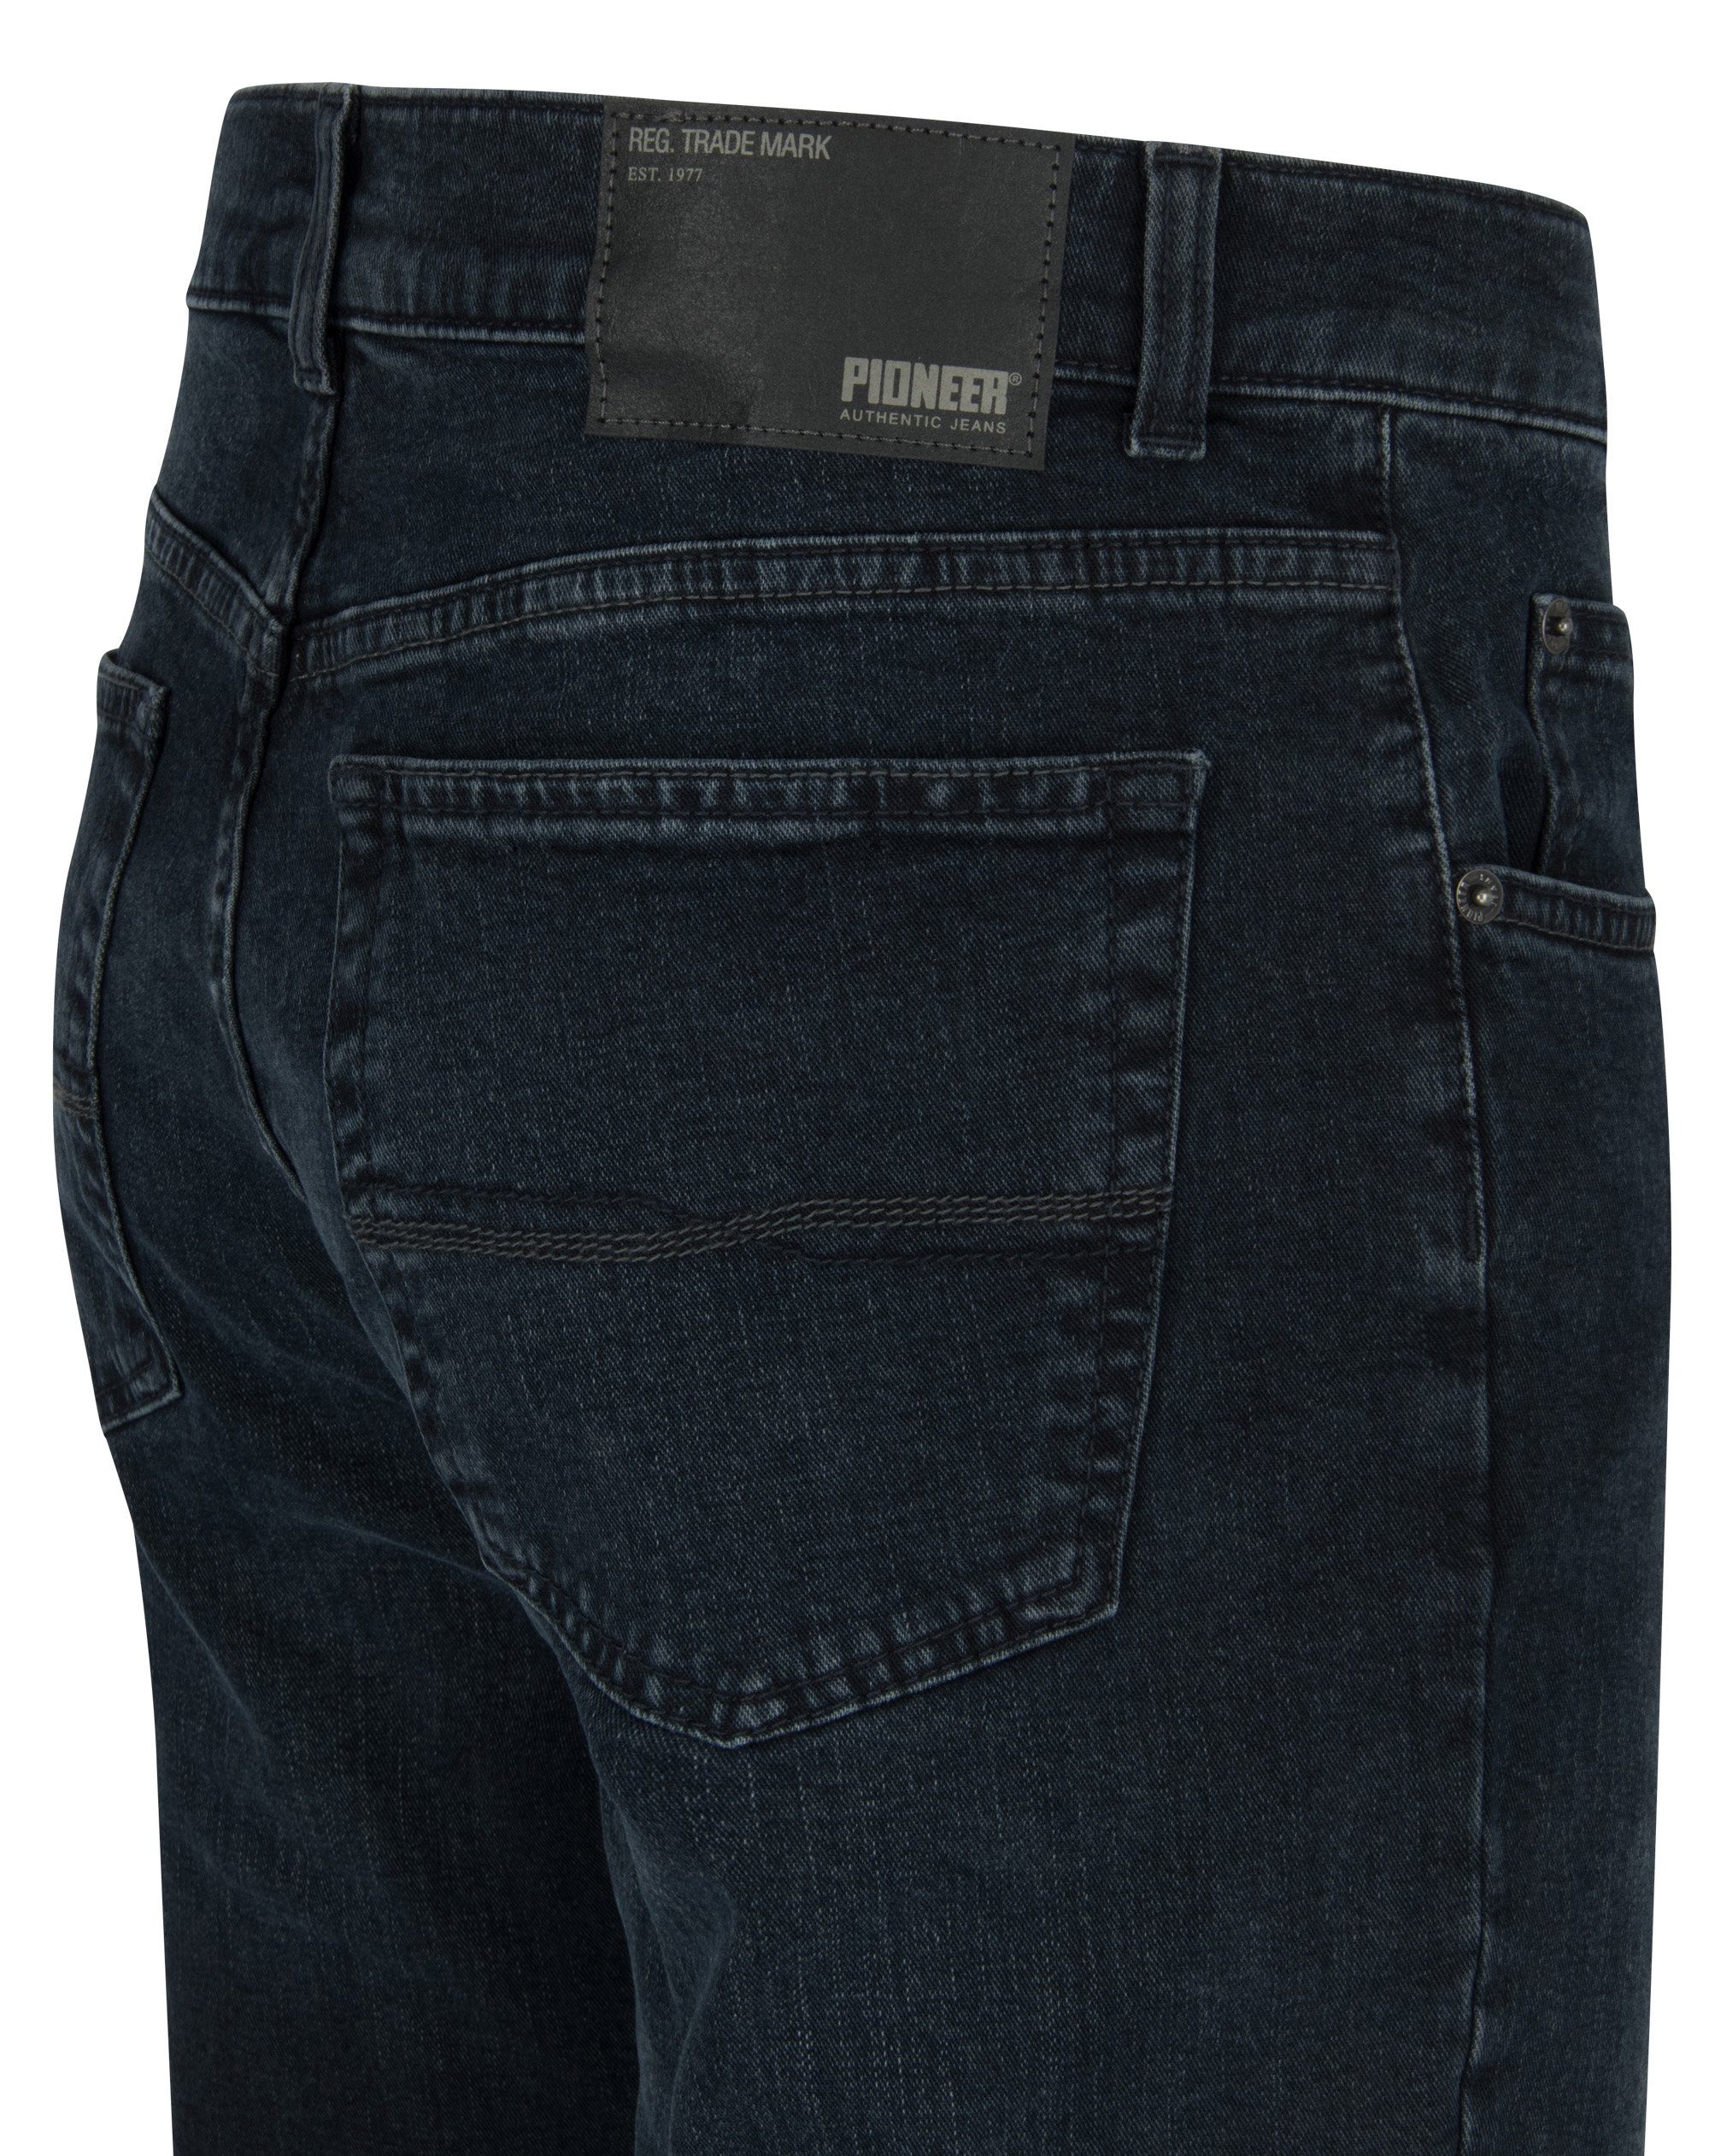 11441 Authentic 6322.6802 blue/black 5-Pocket-Jeans Jeans used Pioneer PIONEER RON